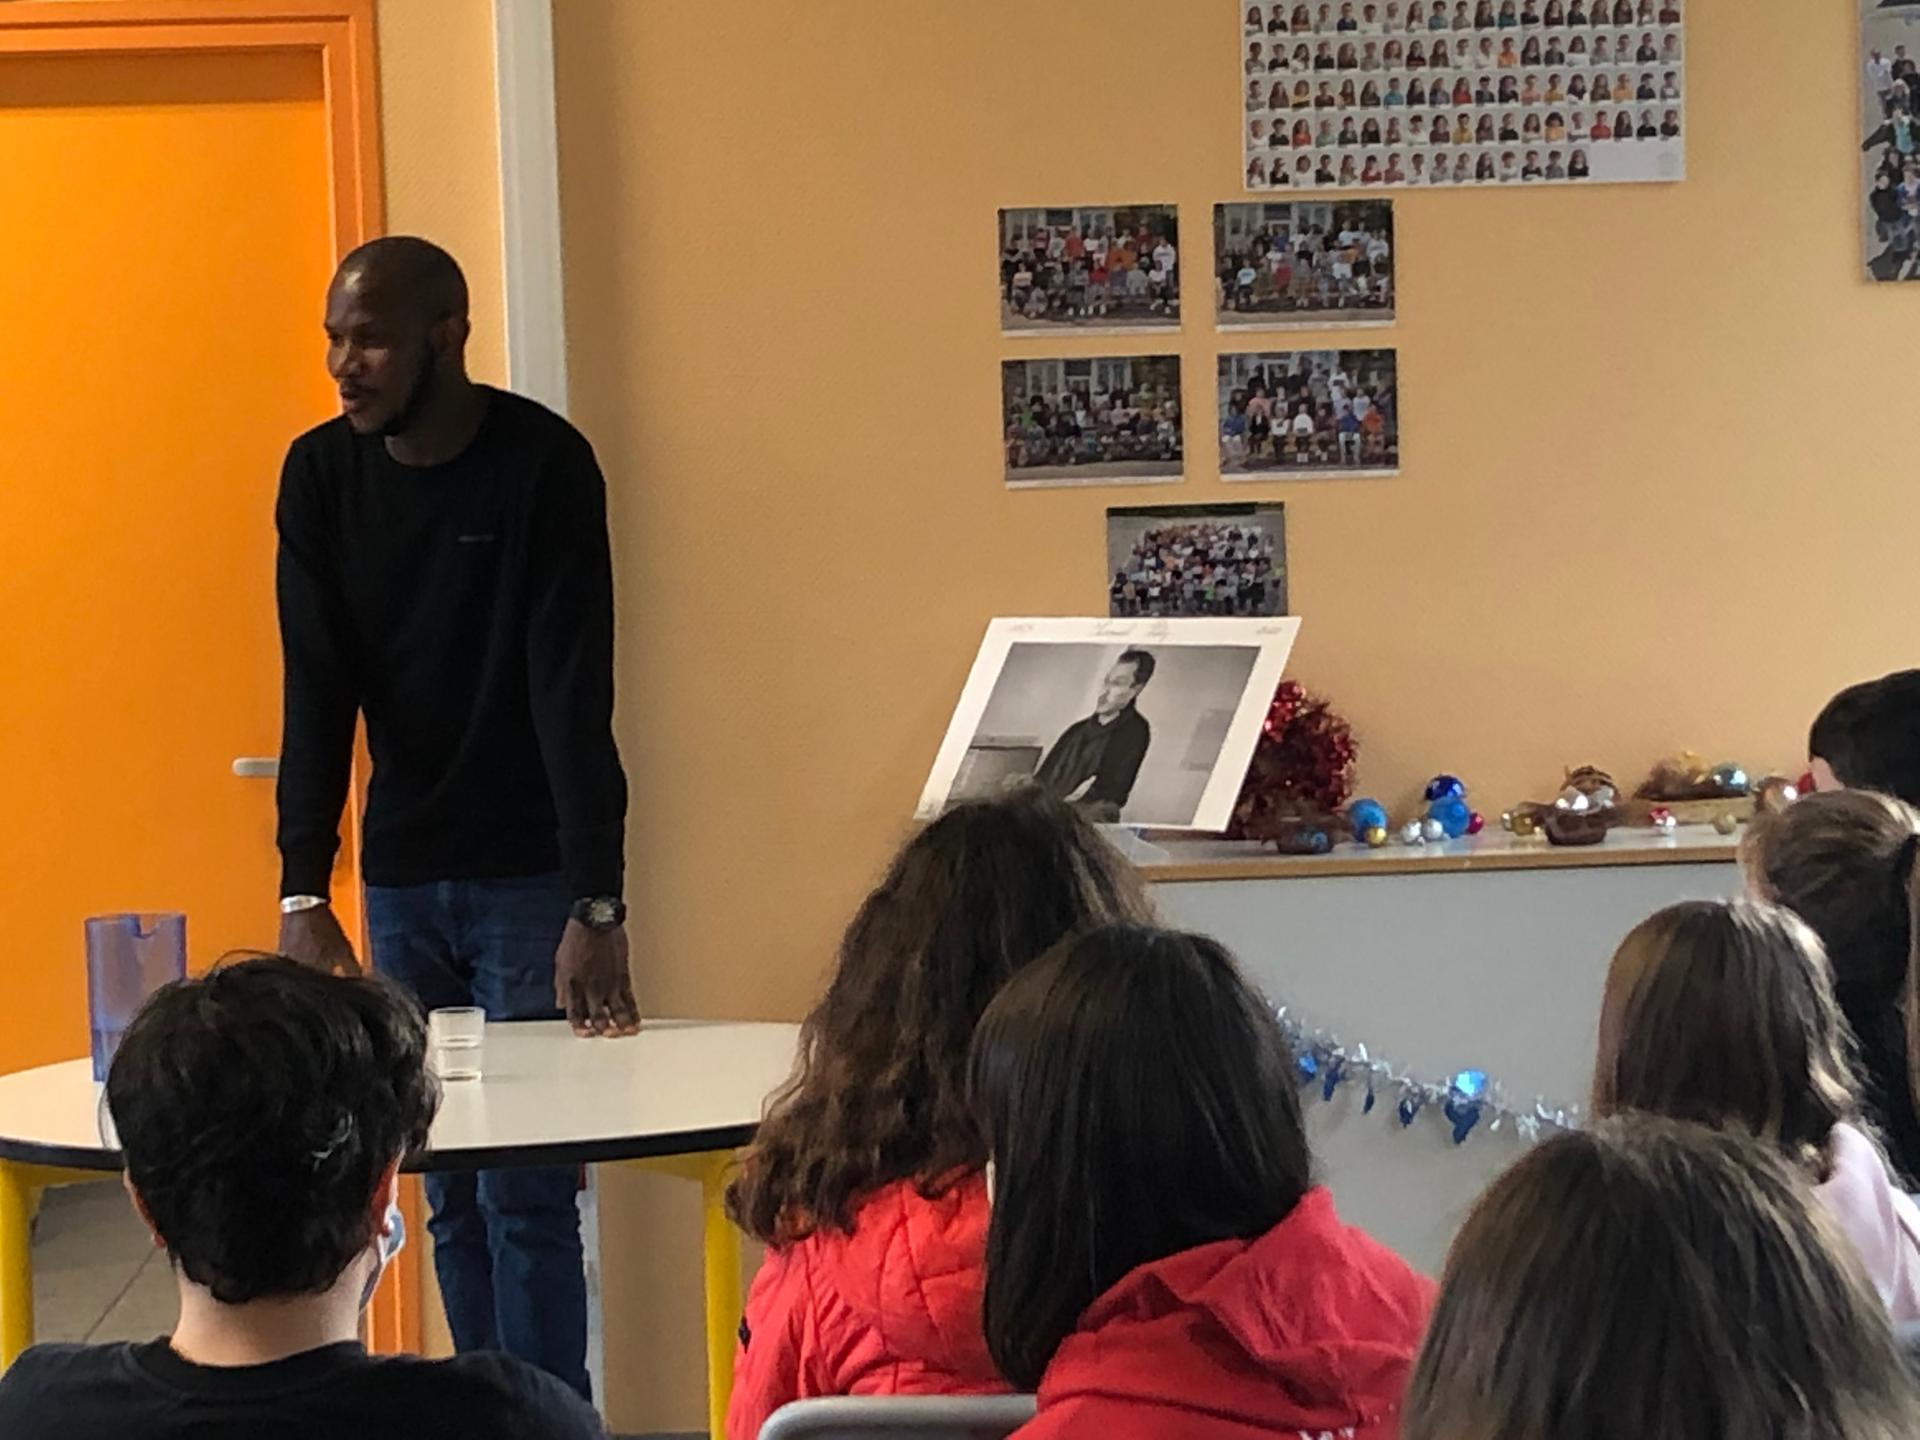 Lassana Bathily speaks to a group of students at Francois Charles Middle School in Plougasnou, France, Dec. 11, 2020.